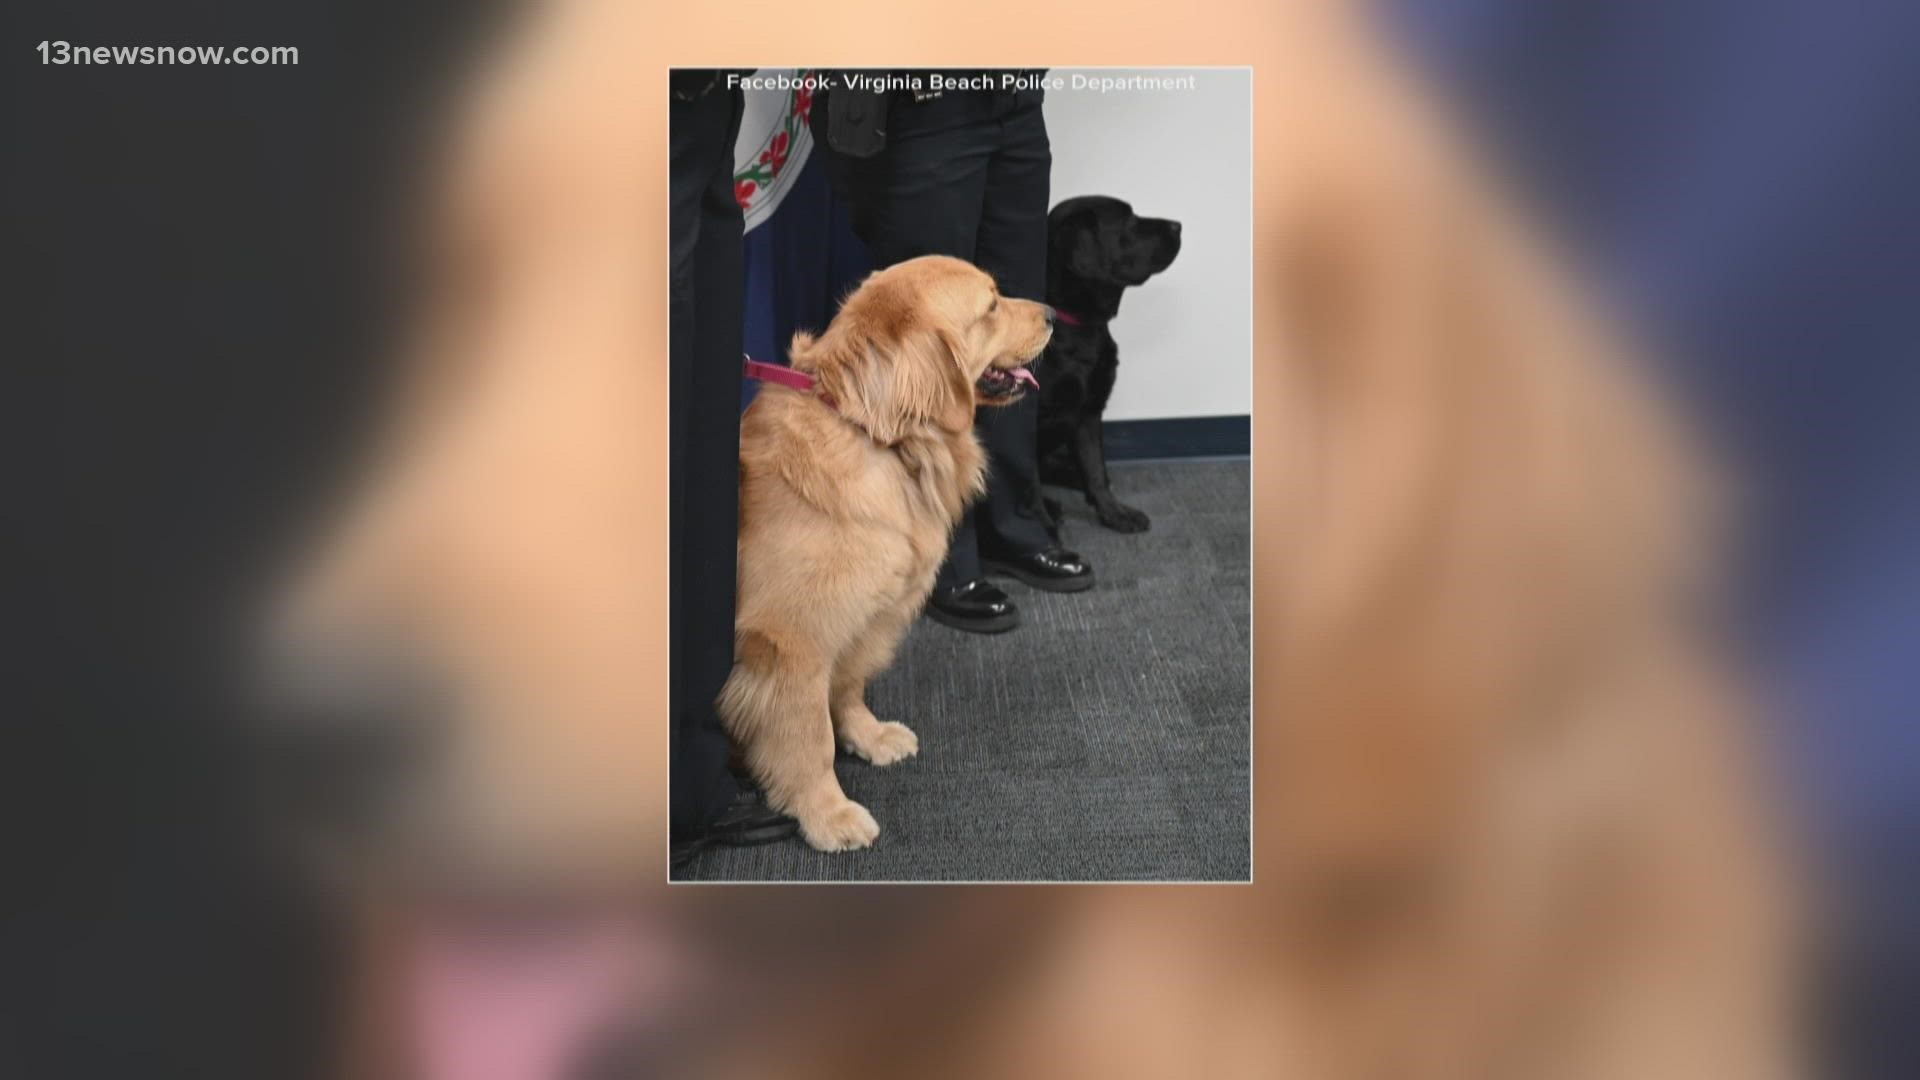 Simba and Geo were sworn in Tuesday into the Virginia Beach Police Department. They are comfort dogs.